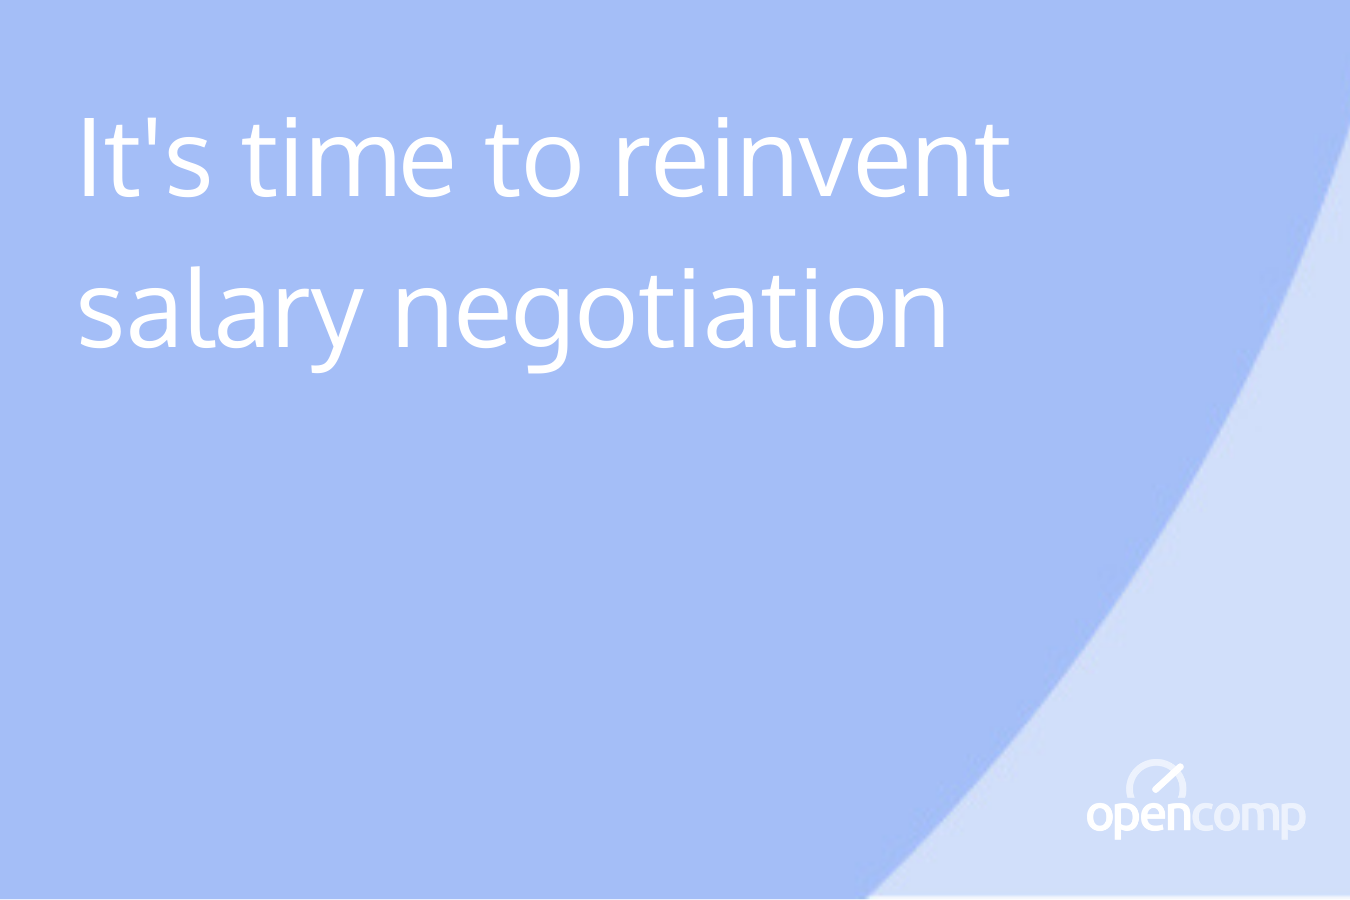 Its time to reinvent salary negotiation